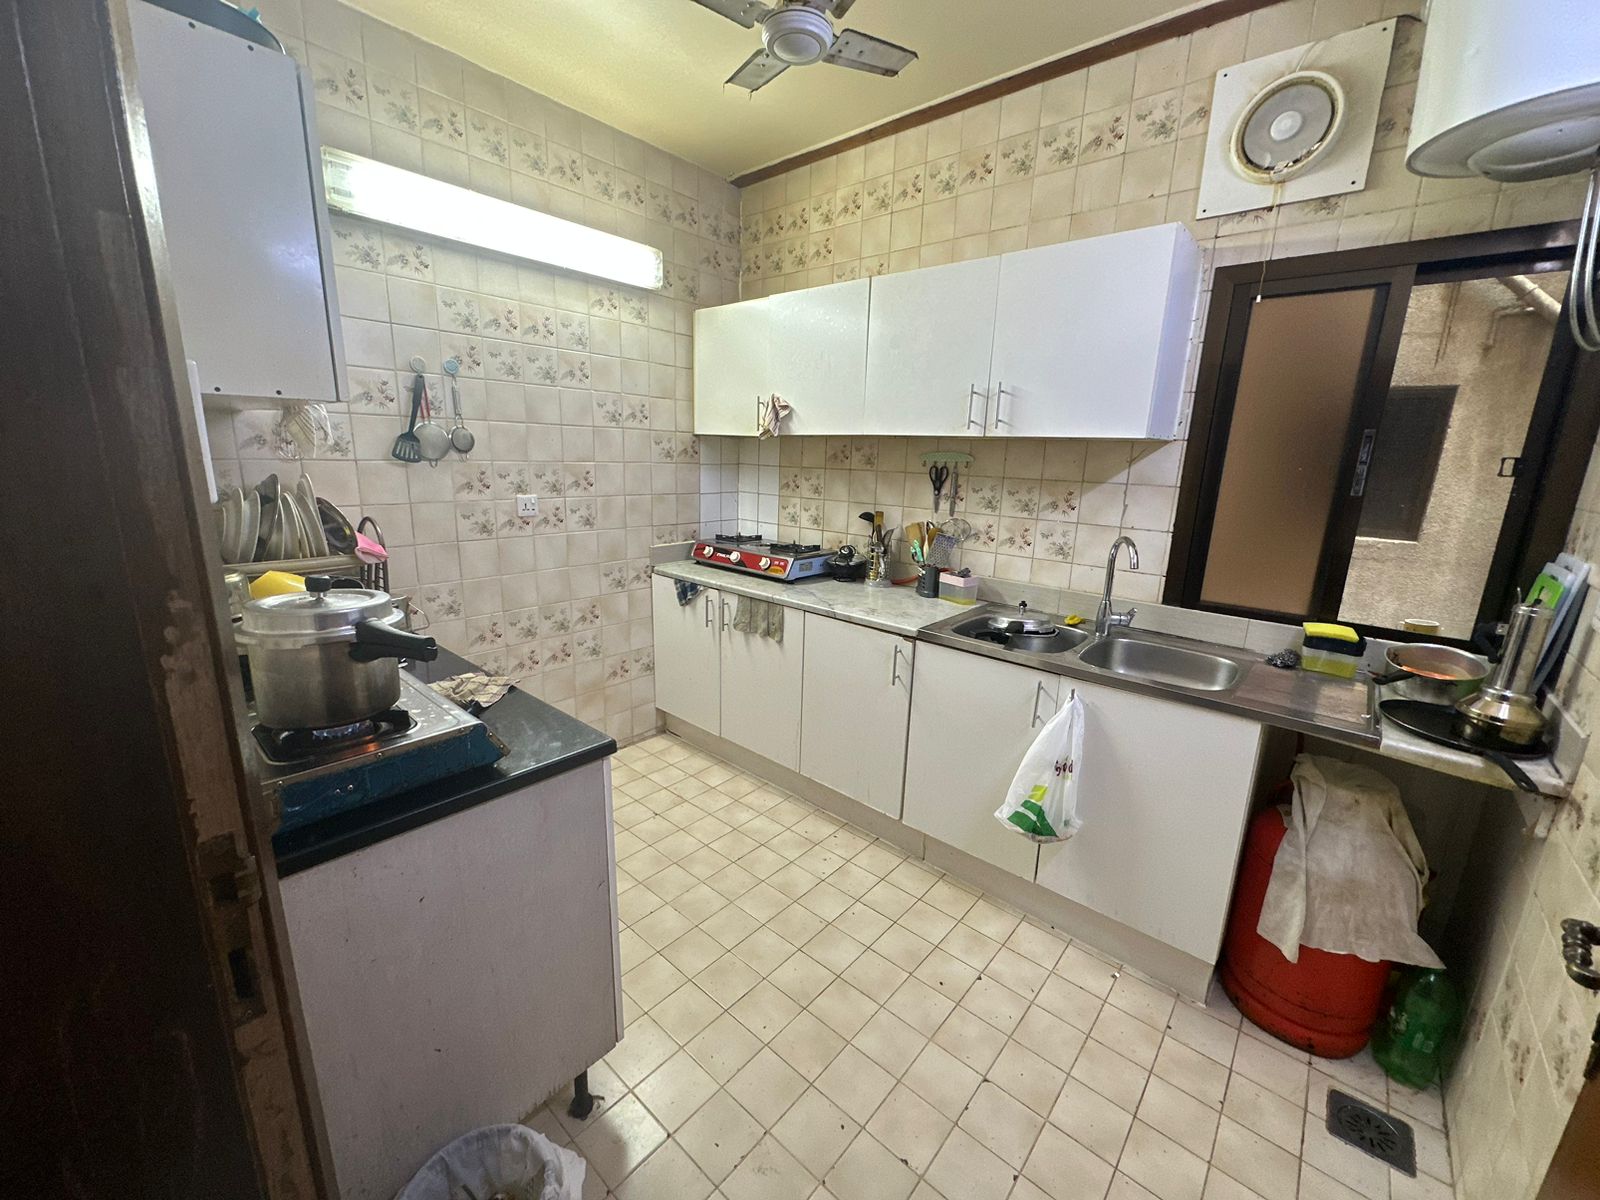 Karama Sharing Bathroom And Kitchen, With Balcony Fully Furnished Room Available